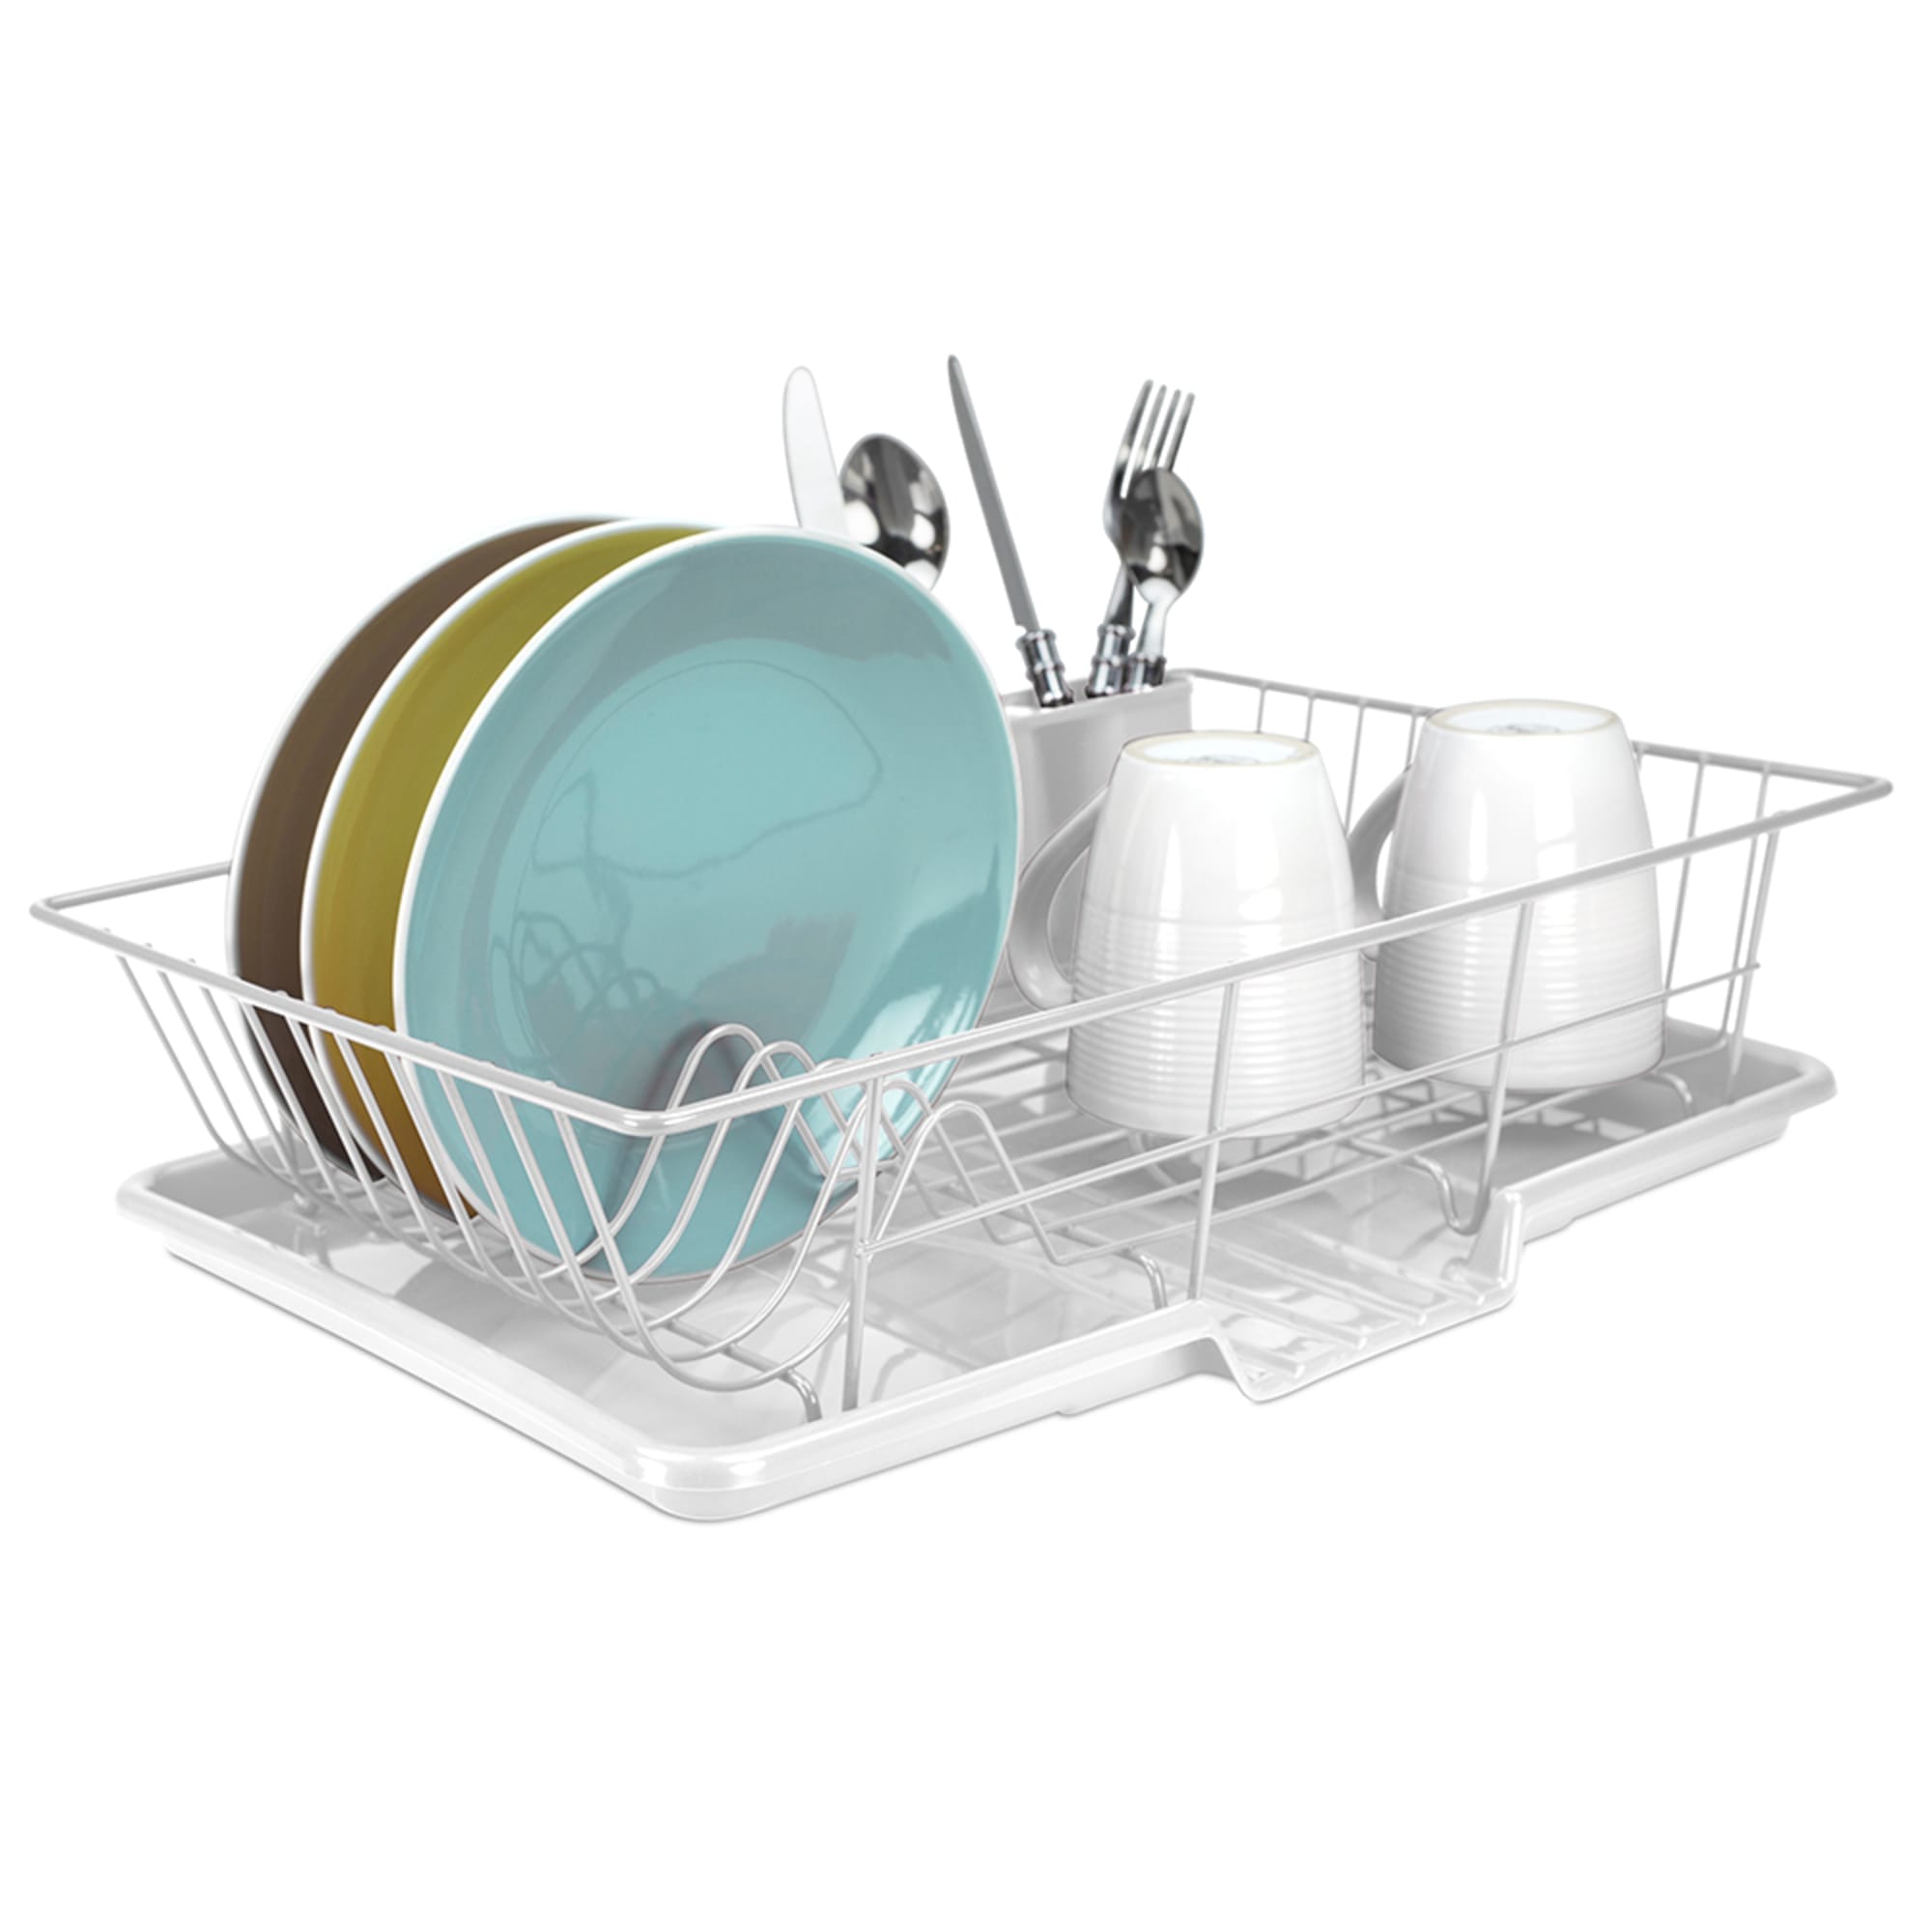 Home Basics 3 Piece Vinyl Coated Steel Dish Drainer, White $10.00 EACH, CASE PACK OF 6